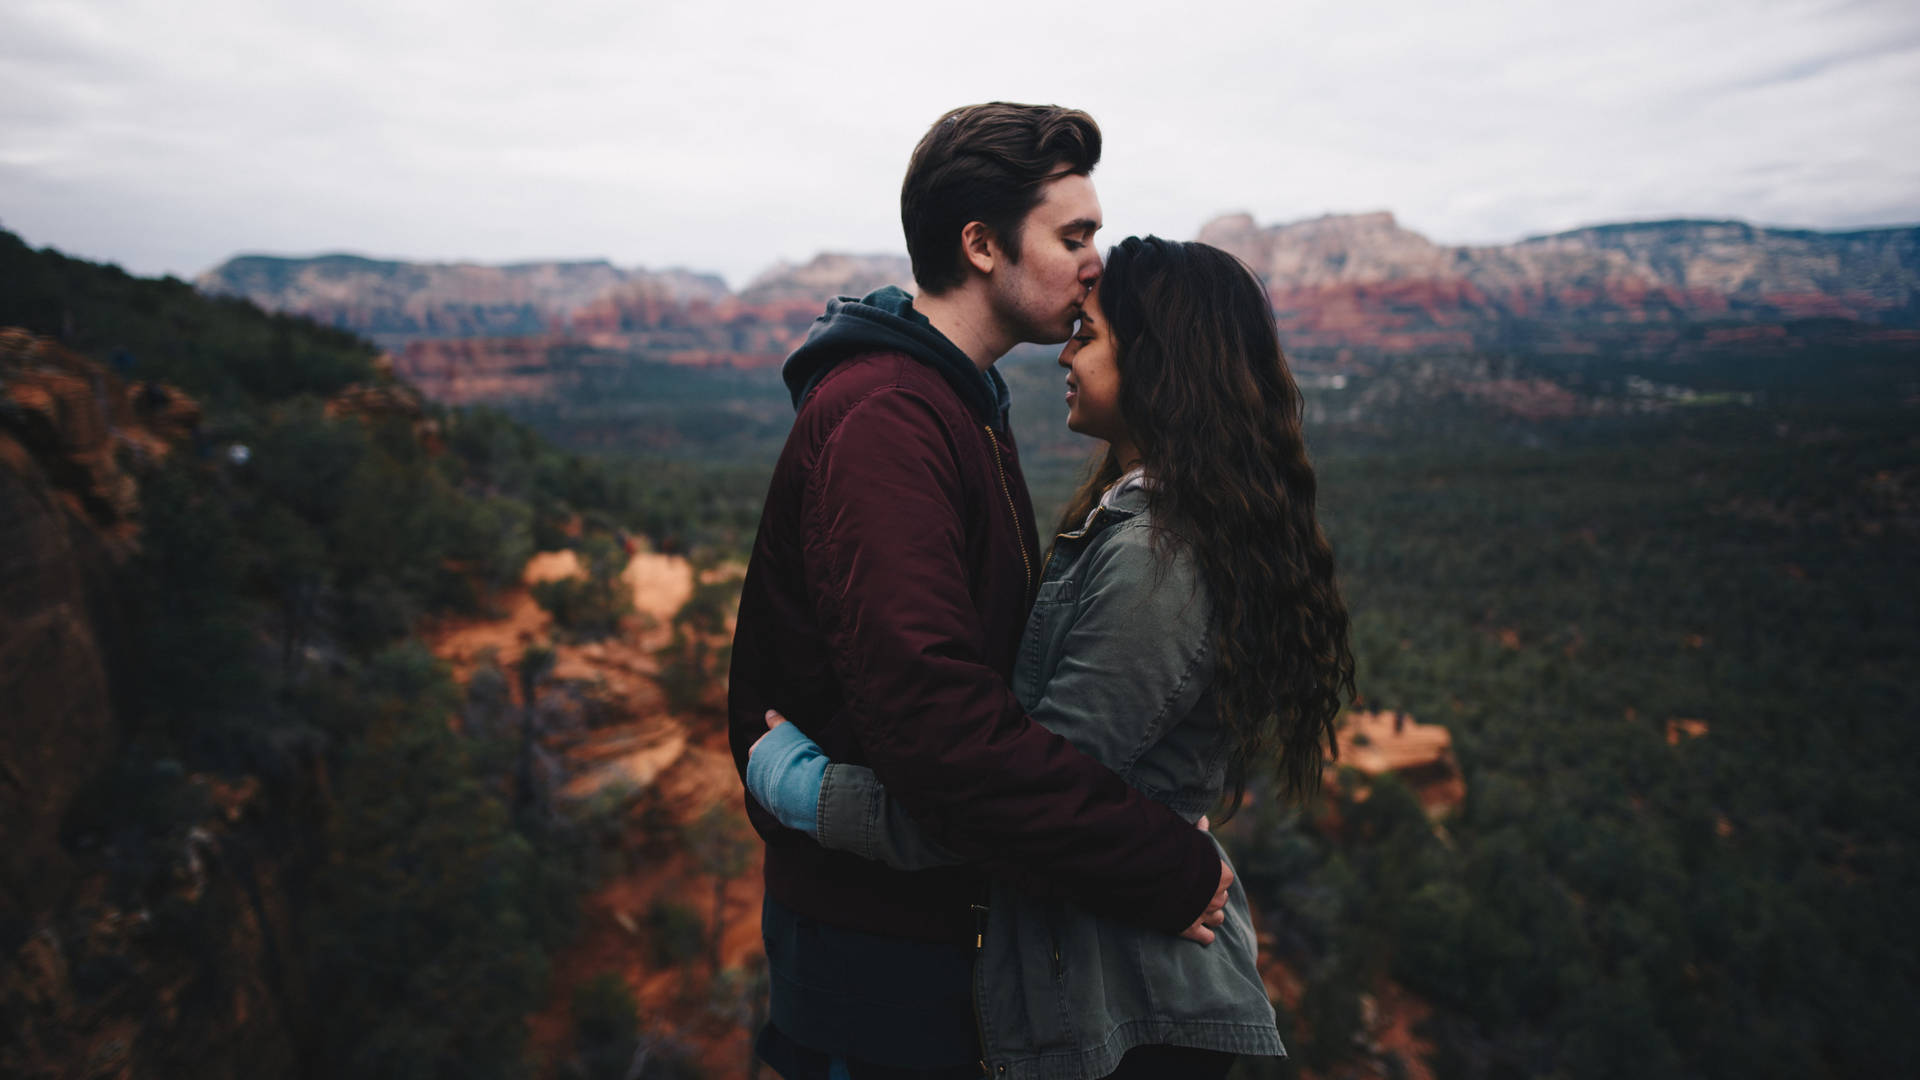 In Love Couples Mountaintop Wallpaper